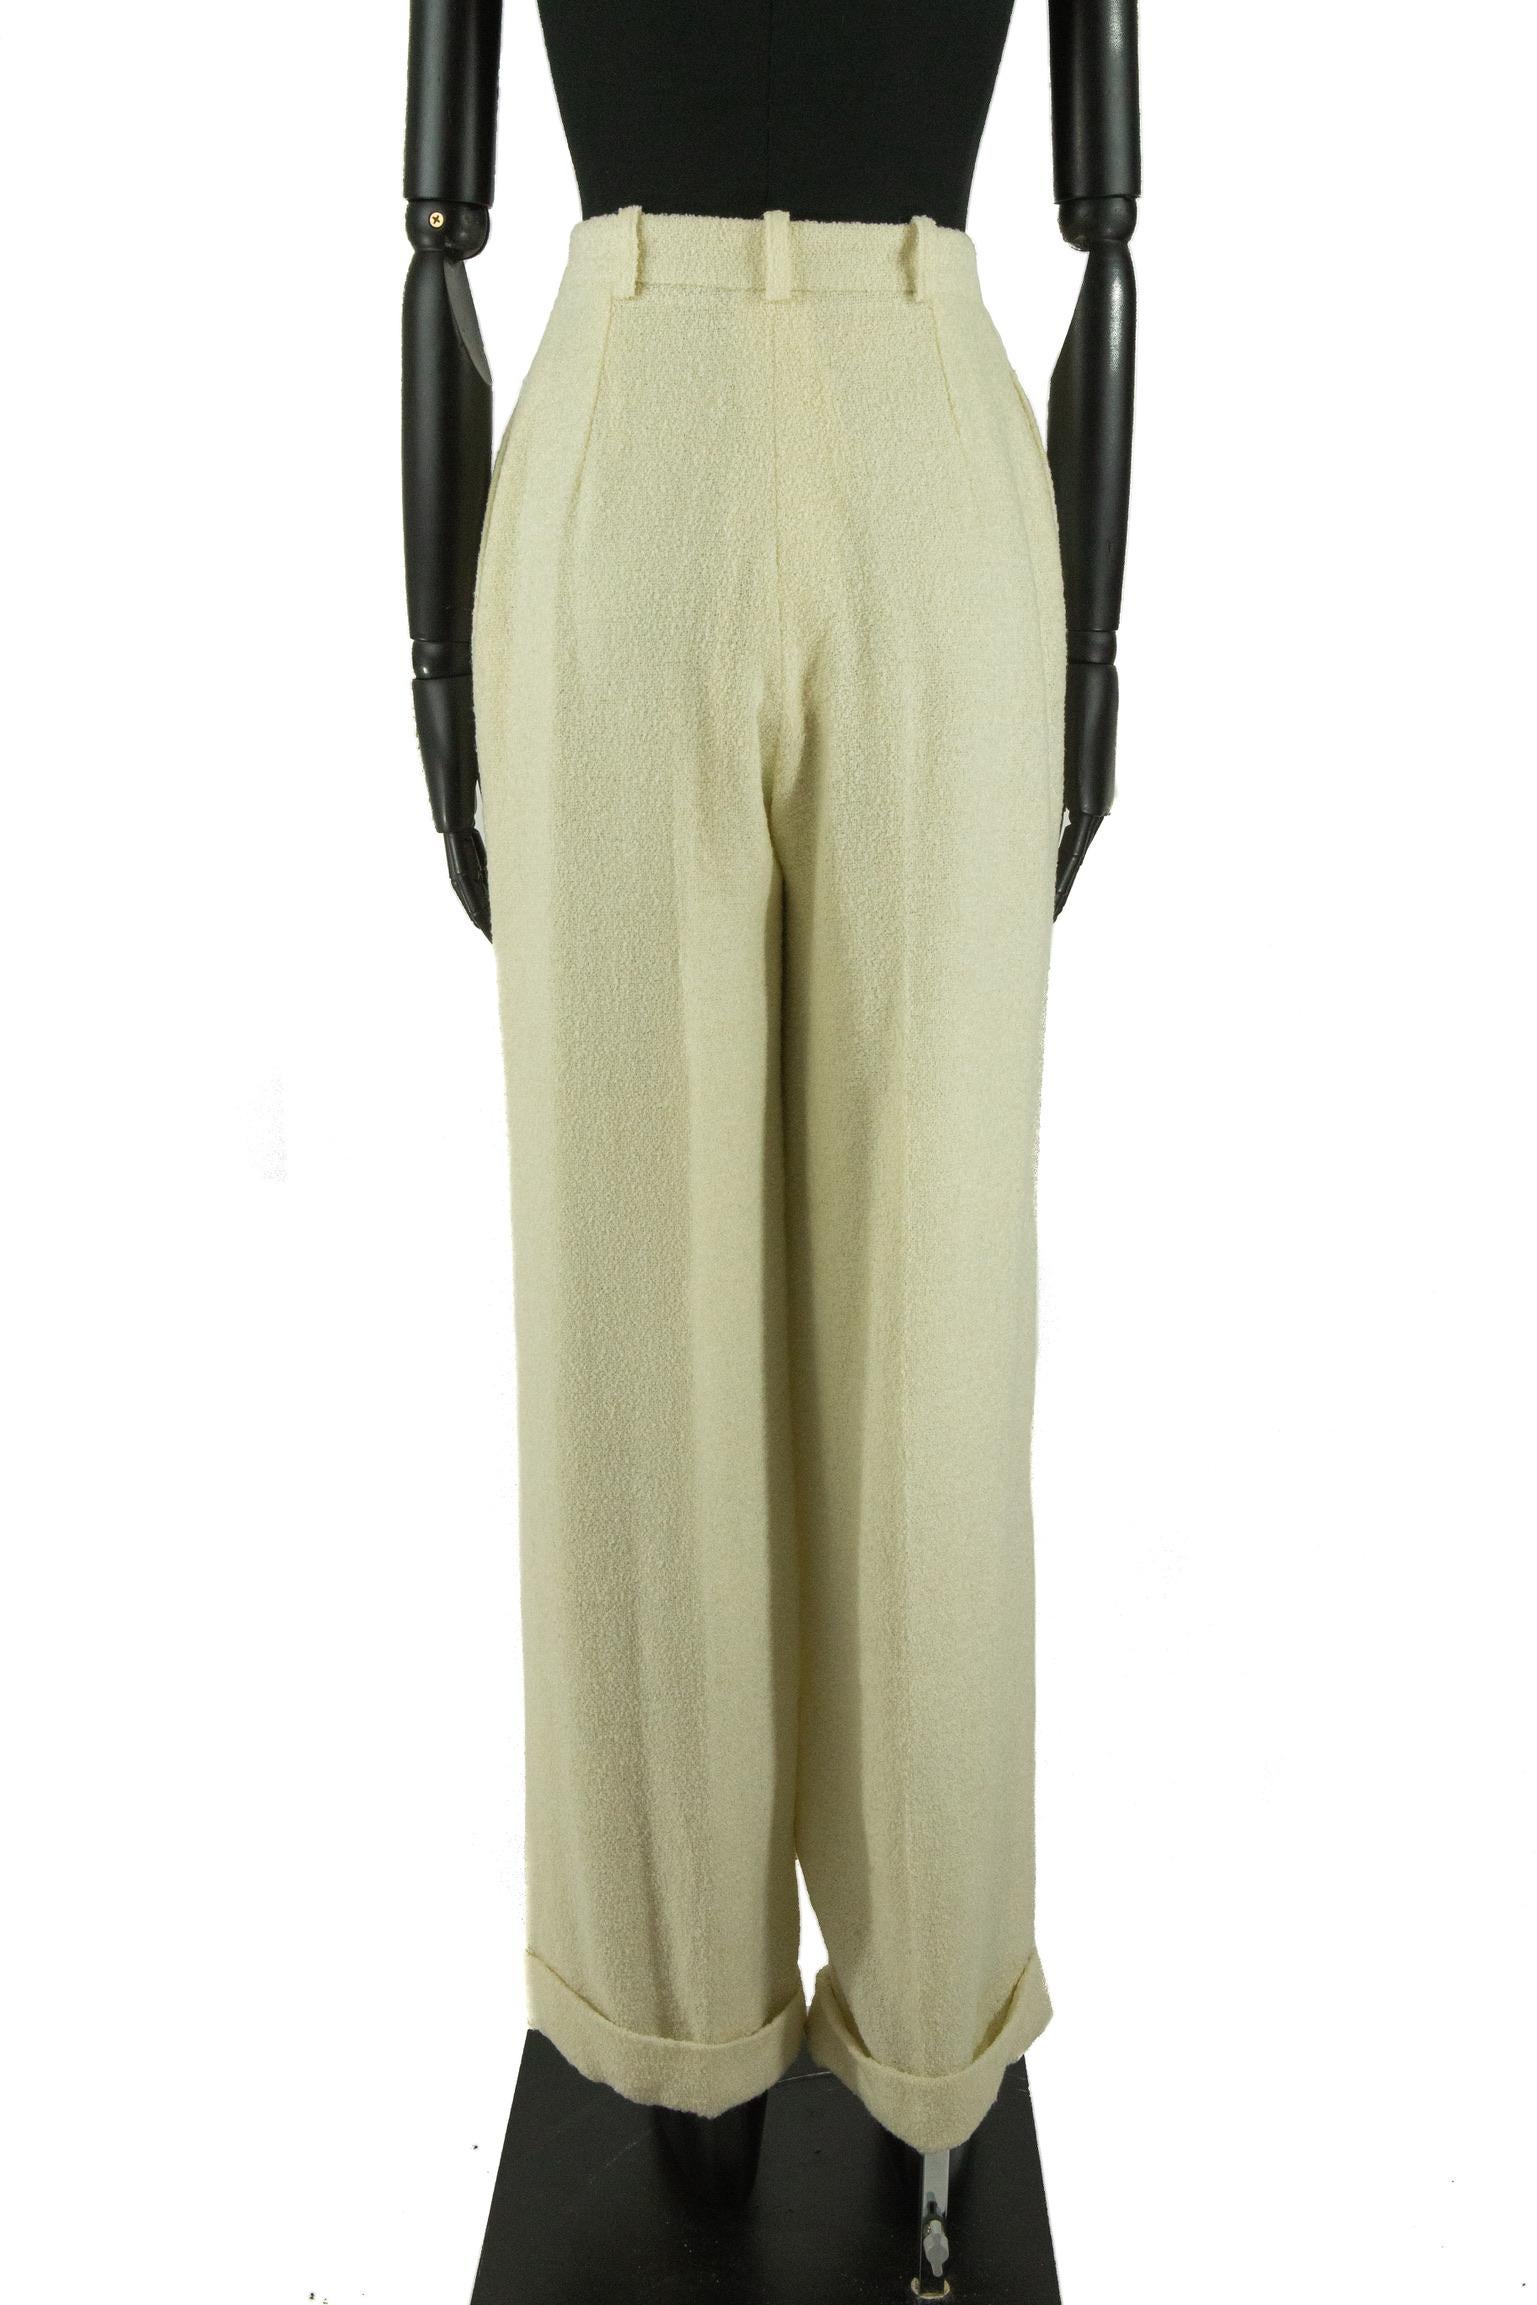 Mid 1990s Christian Dior wide leg high waisted trousers made from soft cream boucle wool, with soft pleated darts in the waistband. The trousers have straight side pockets, front creases and folded over cuffs on the bottom. The waistband has